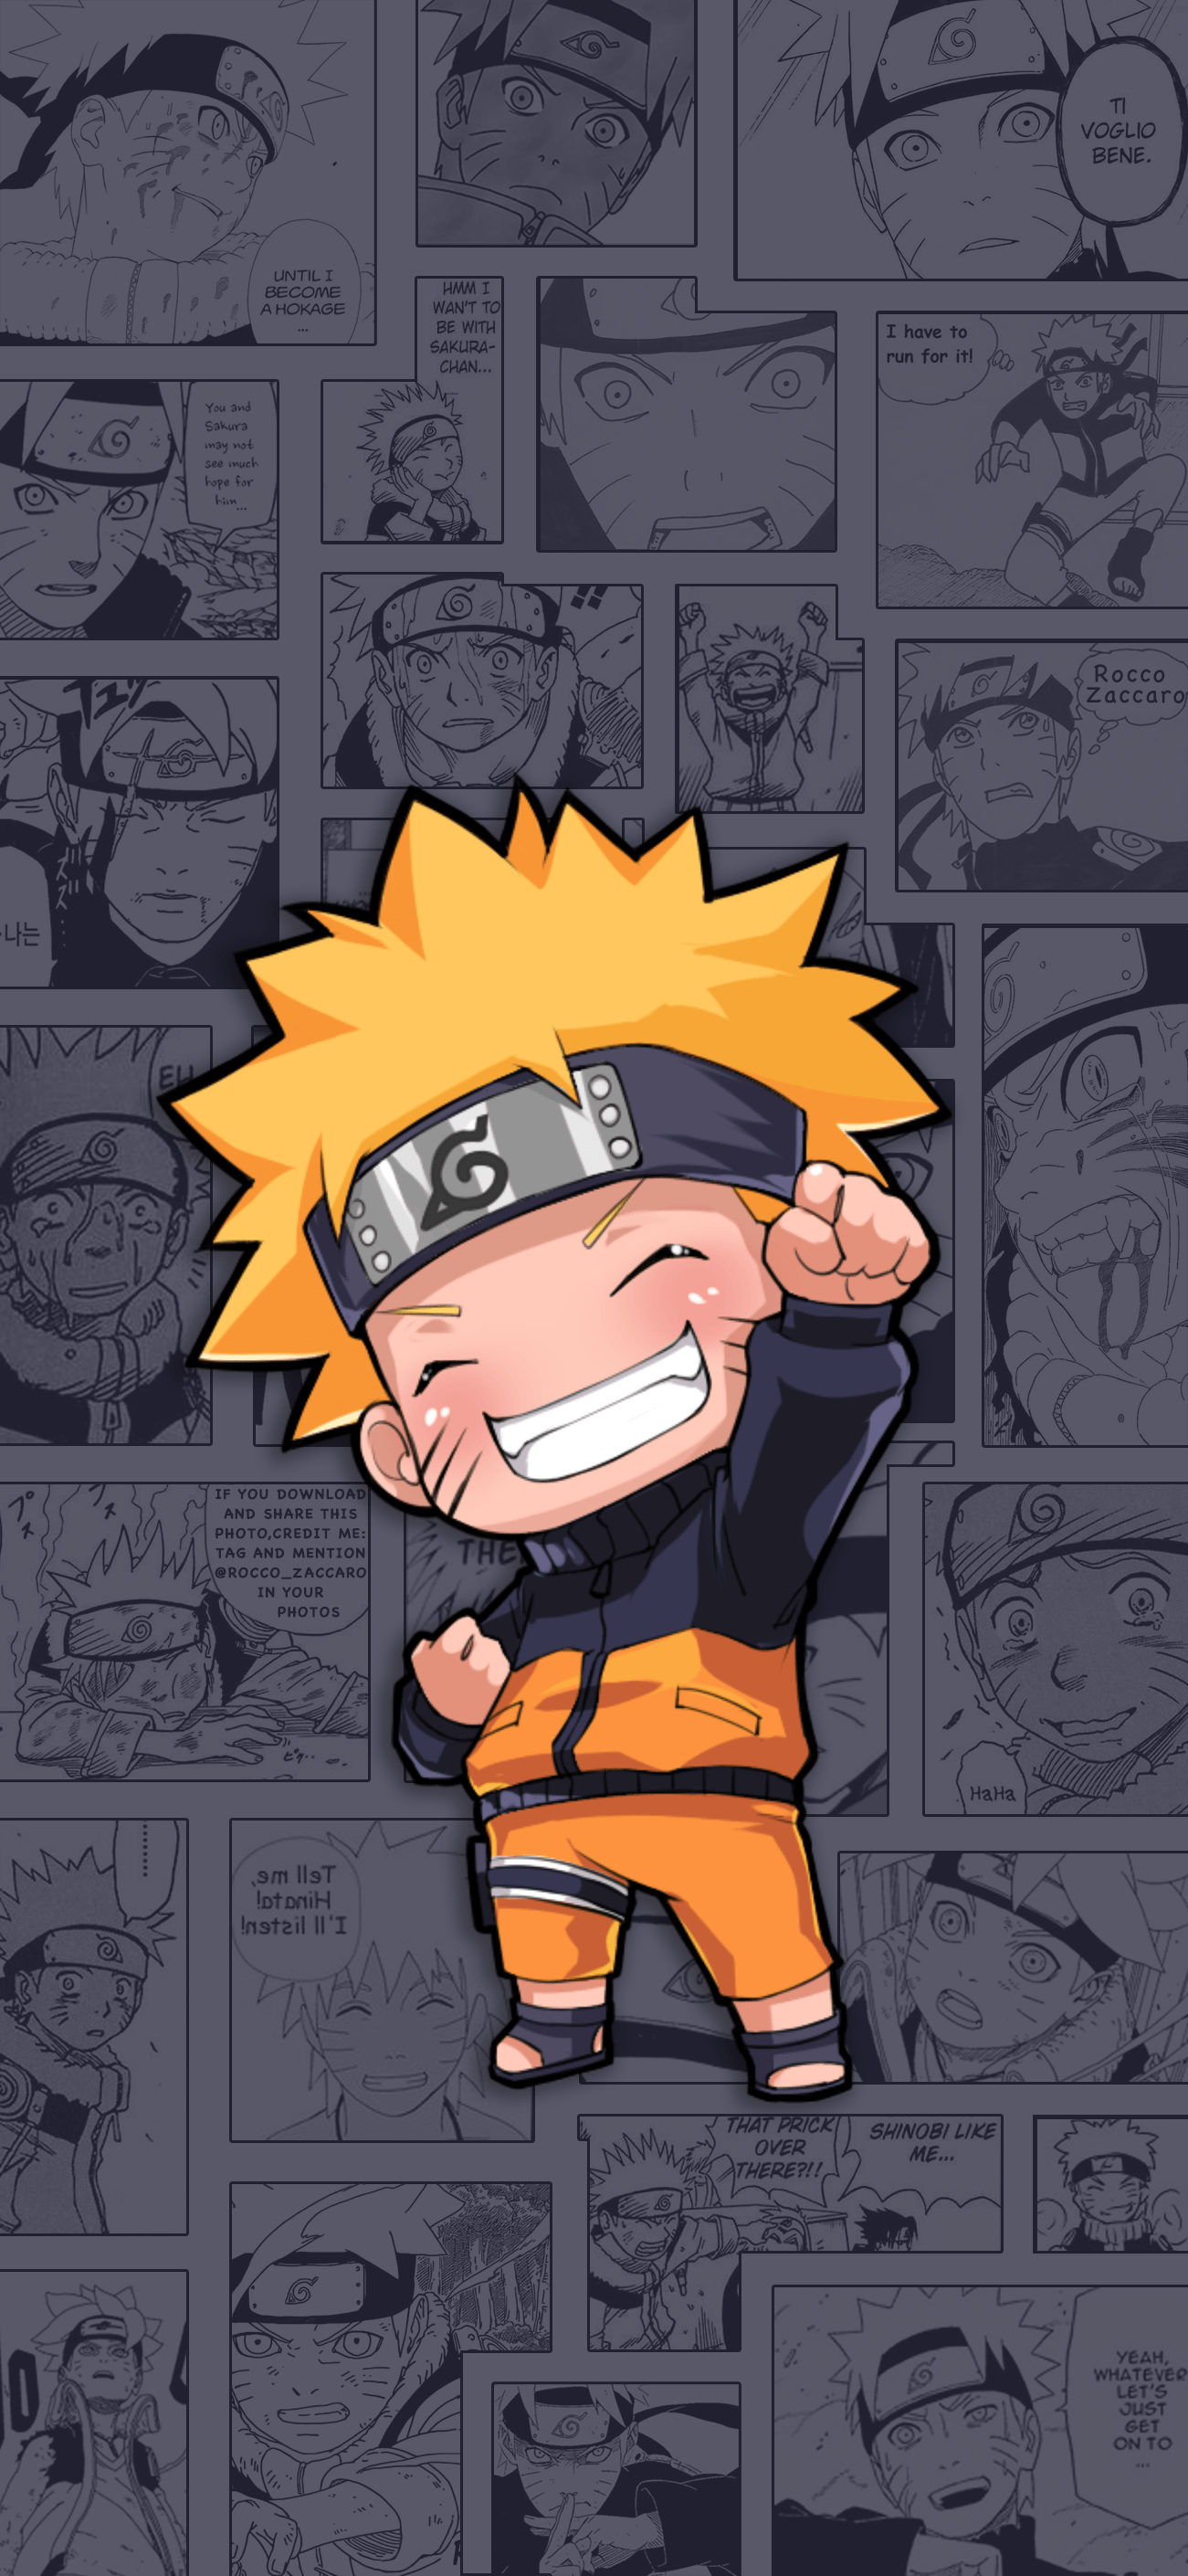 Who are your top 10 cutest female Naruto characters when young? - Quora